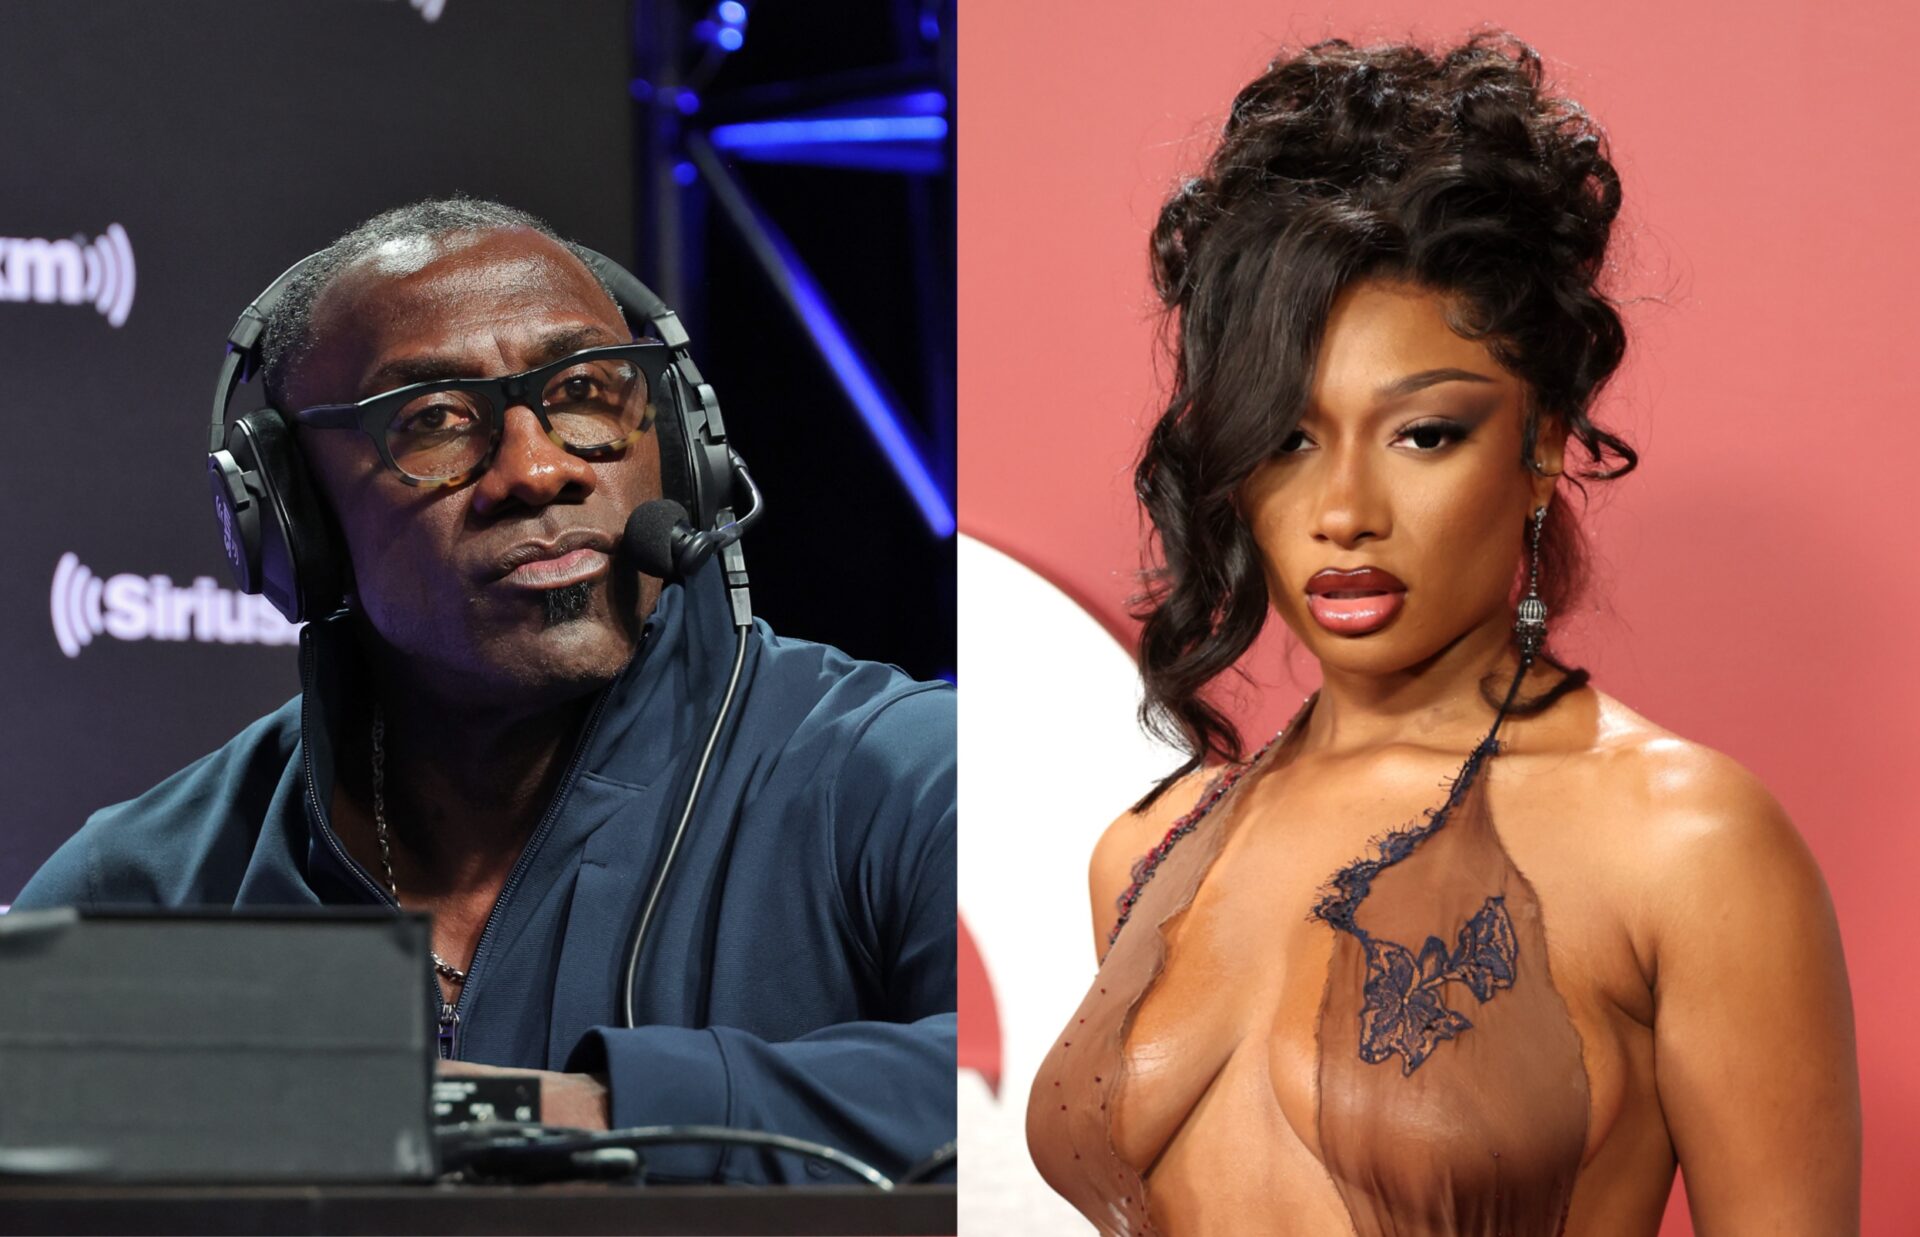 Shannon Sharpe, Megan, thee stallion, quarter to three, sexual comments,